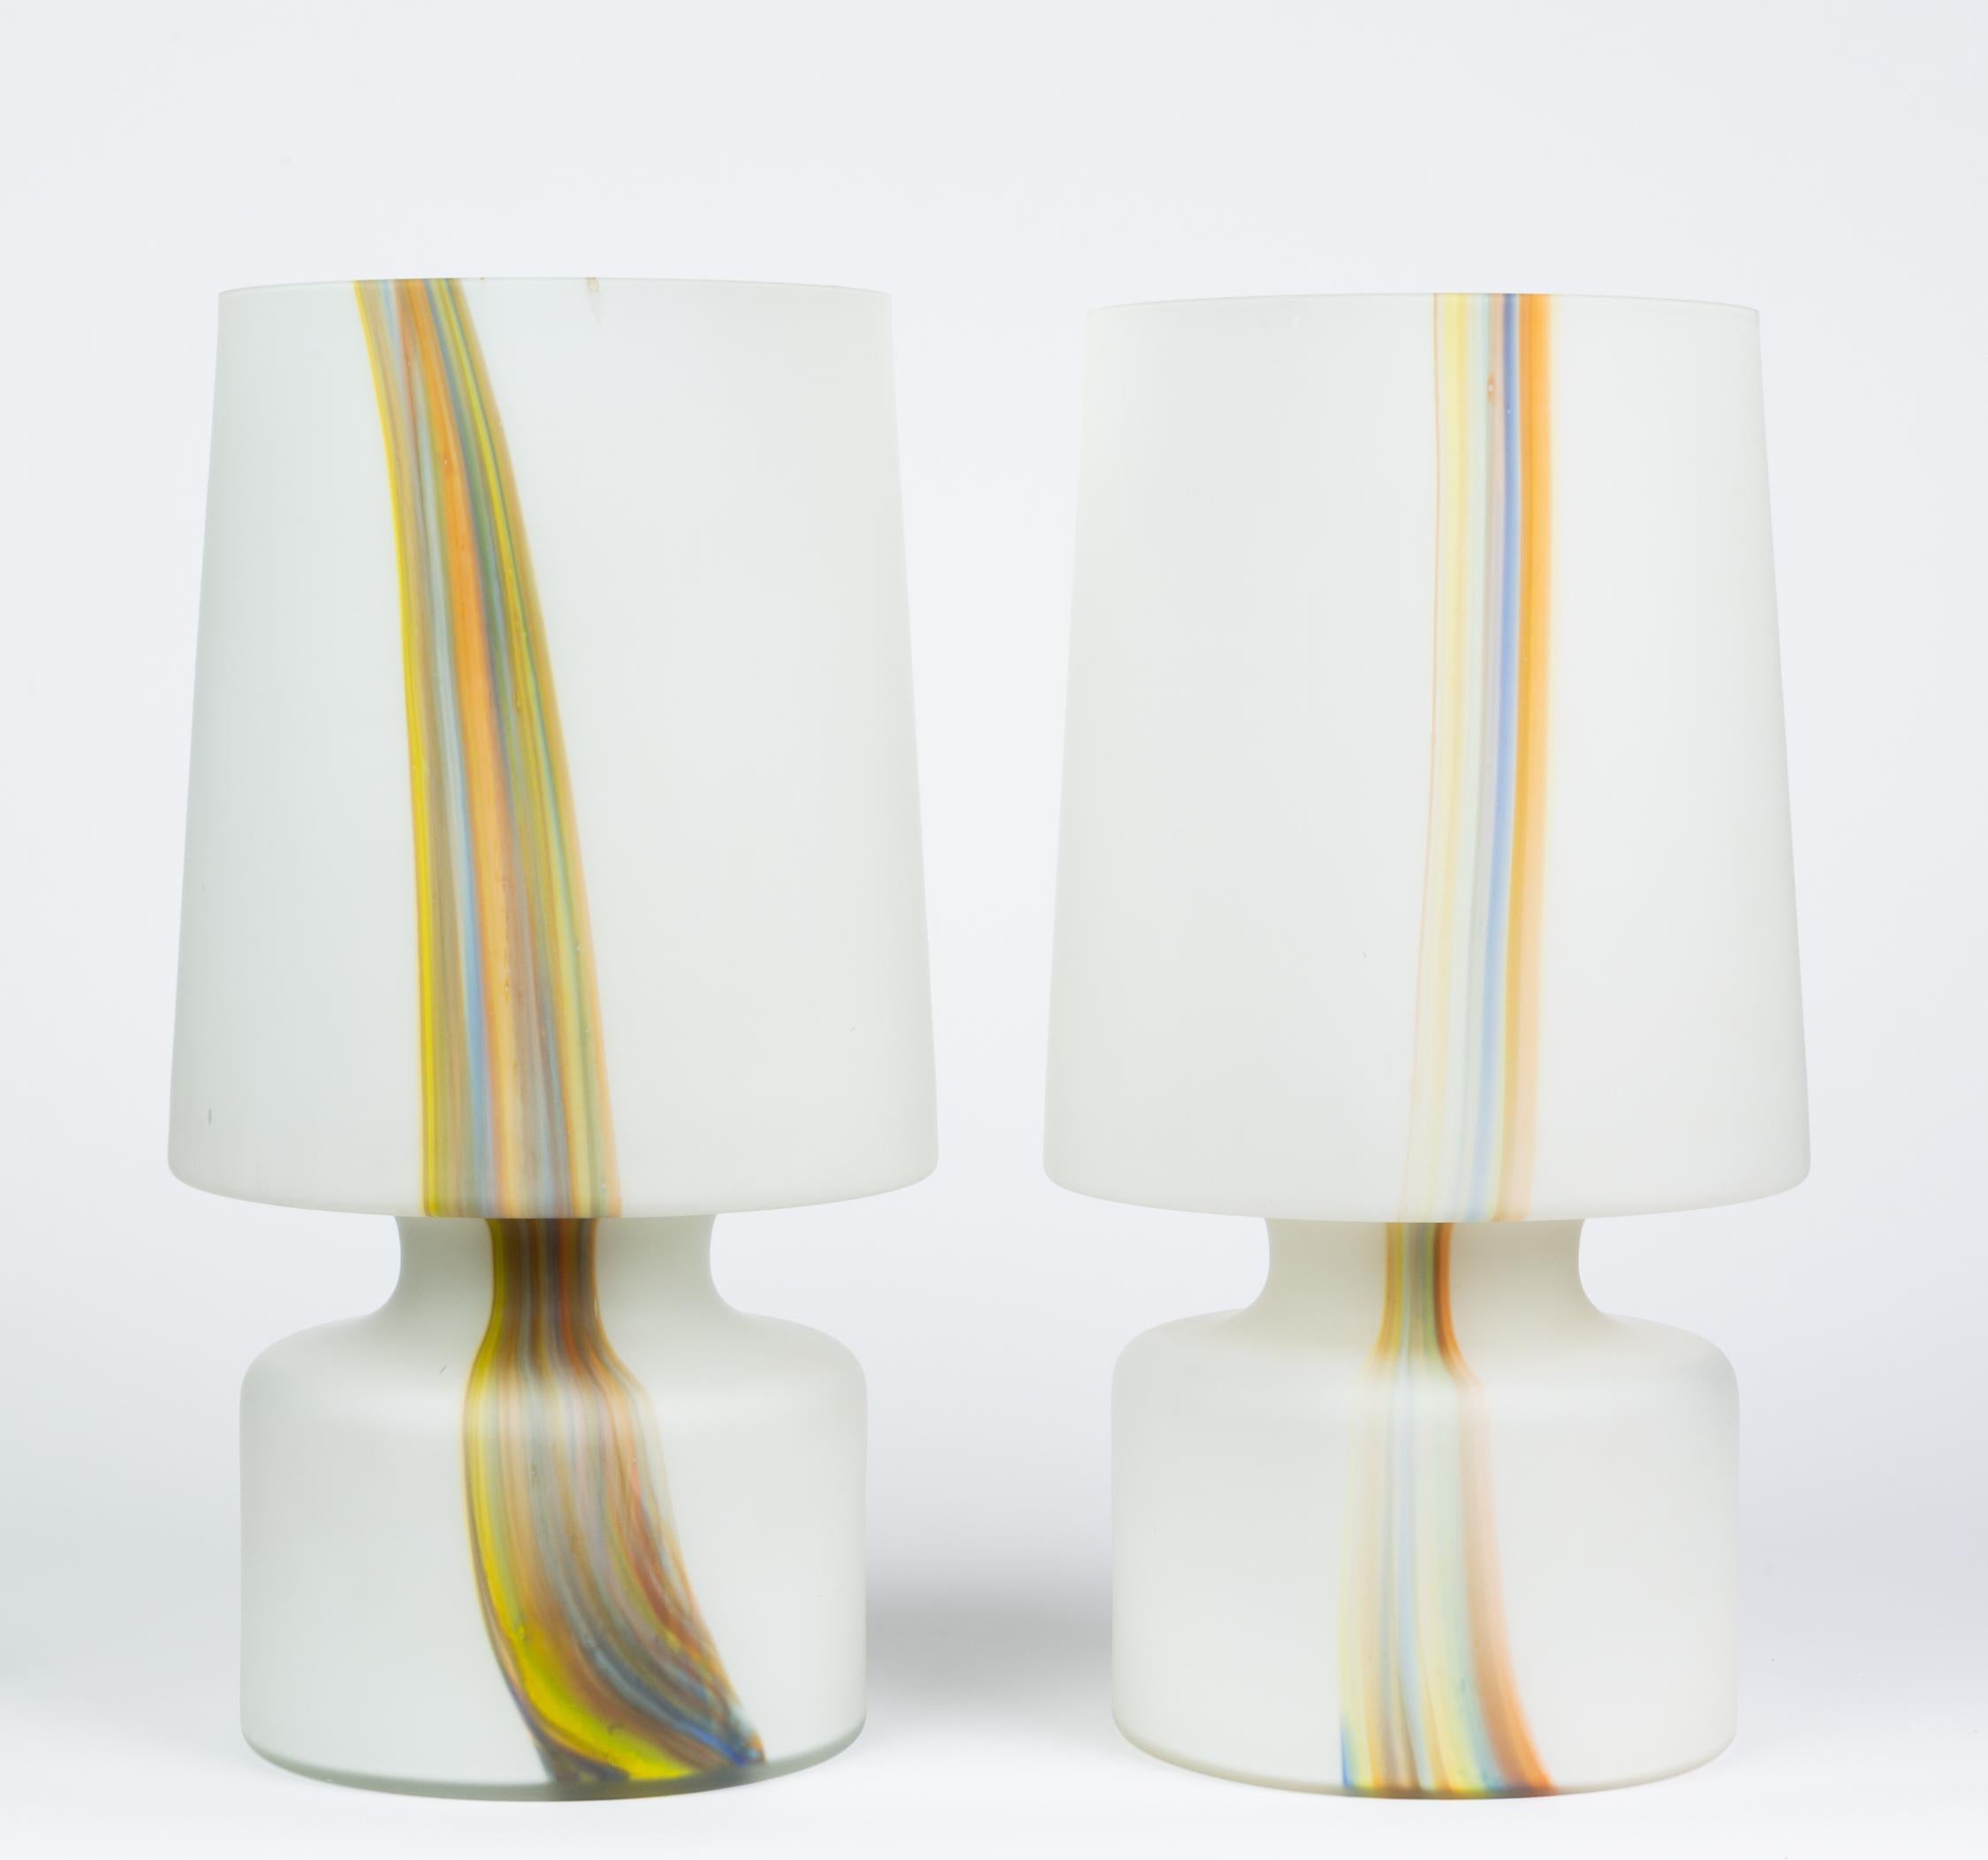 A pair of tall frosted glass lamps from Laurel Lamp Co. Constructed in the shape of a more traditional lamp vessel and detached drum shade, the piece is actually rendered from a single piece of frosted glass. The glass incorporates a ribbon of